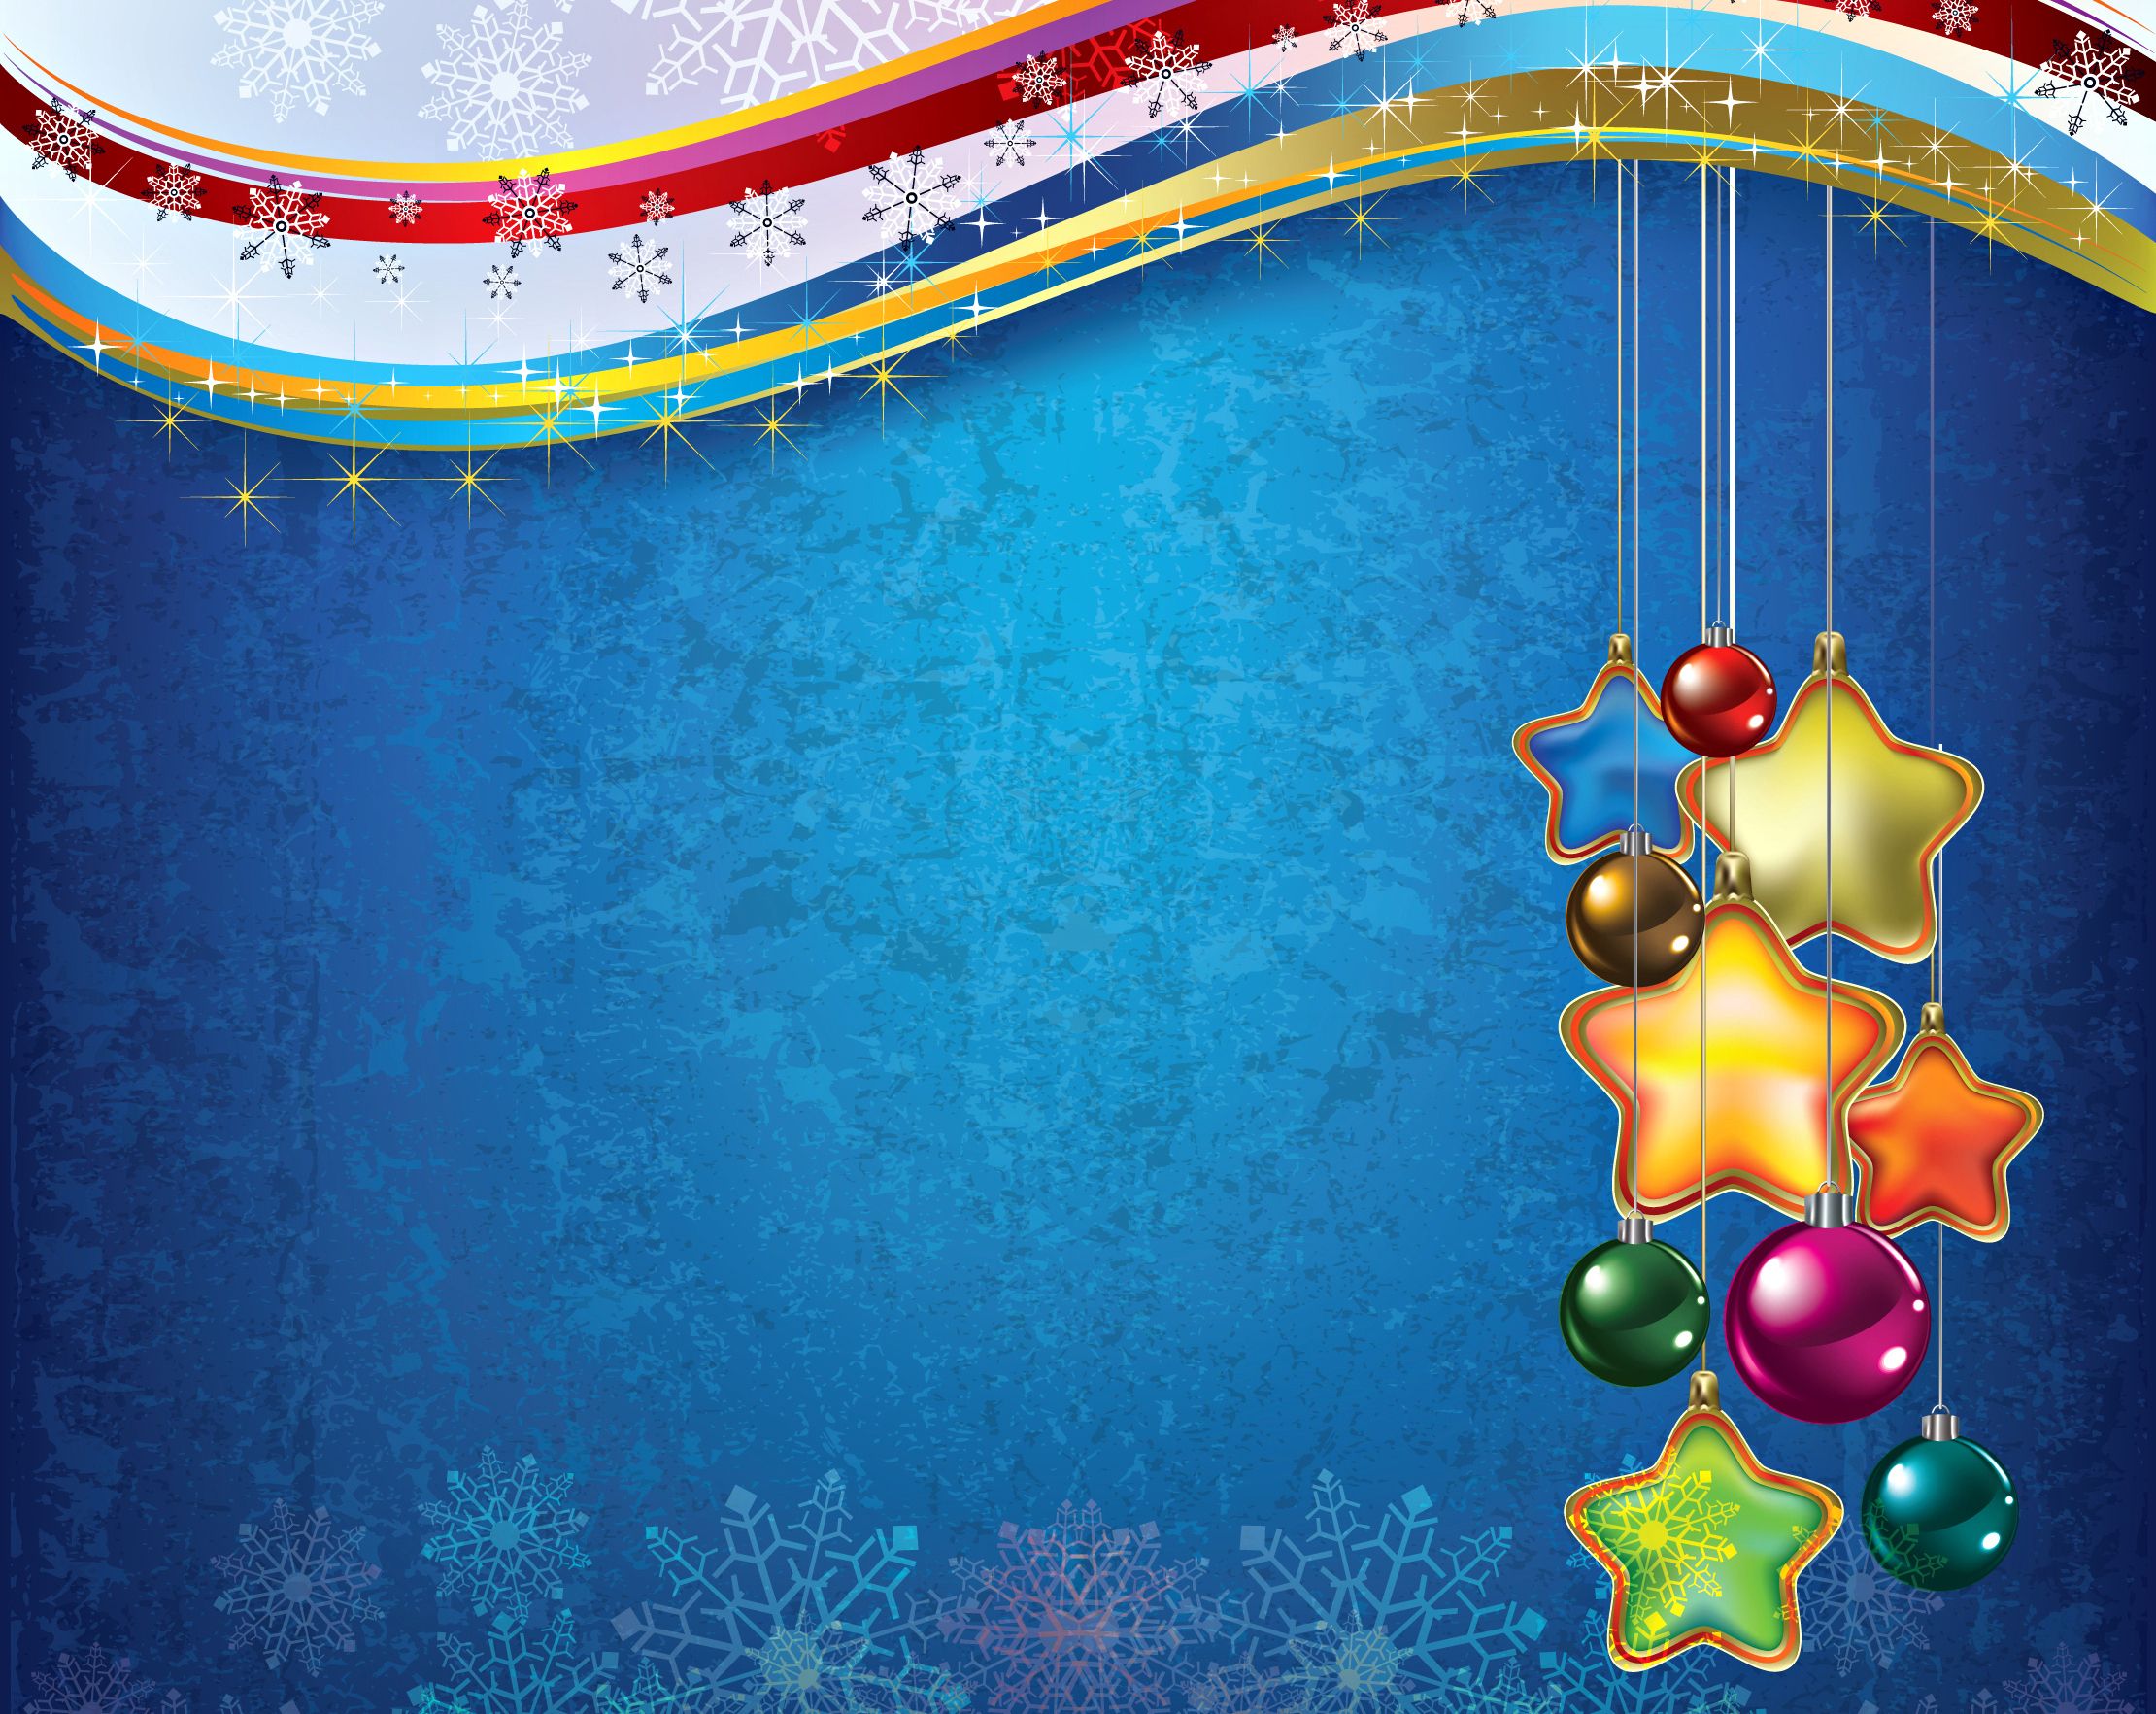 Christmas background wallpapers and images - wallpapers, pictures ...